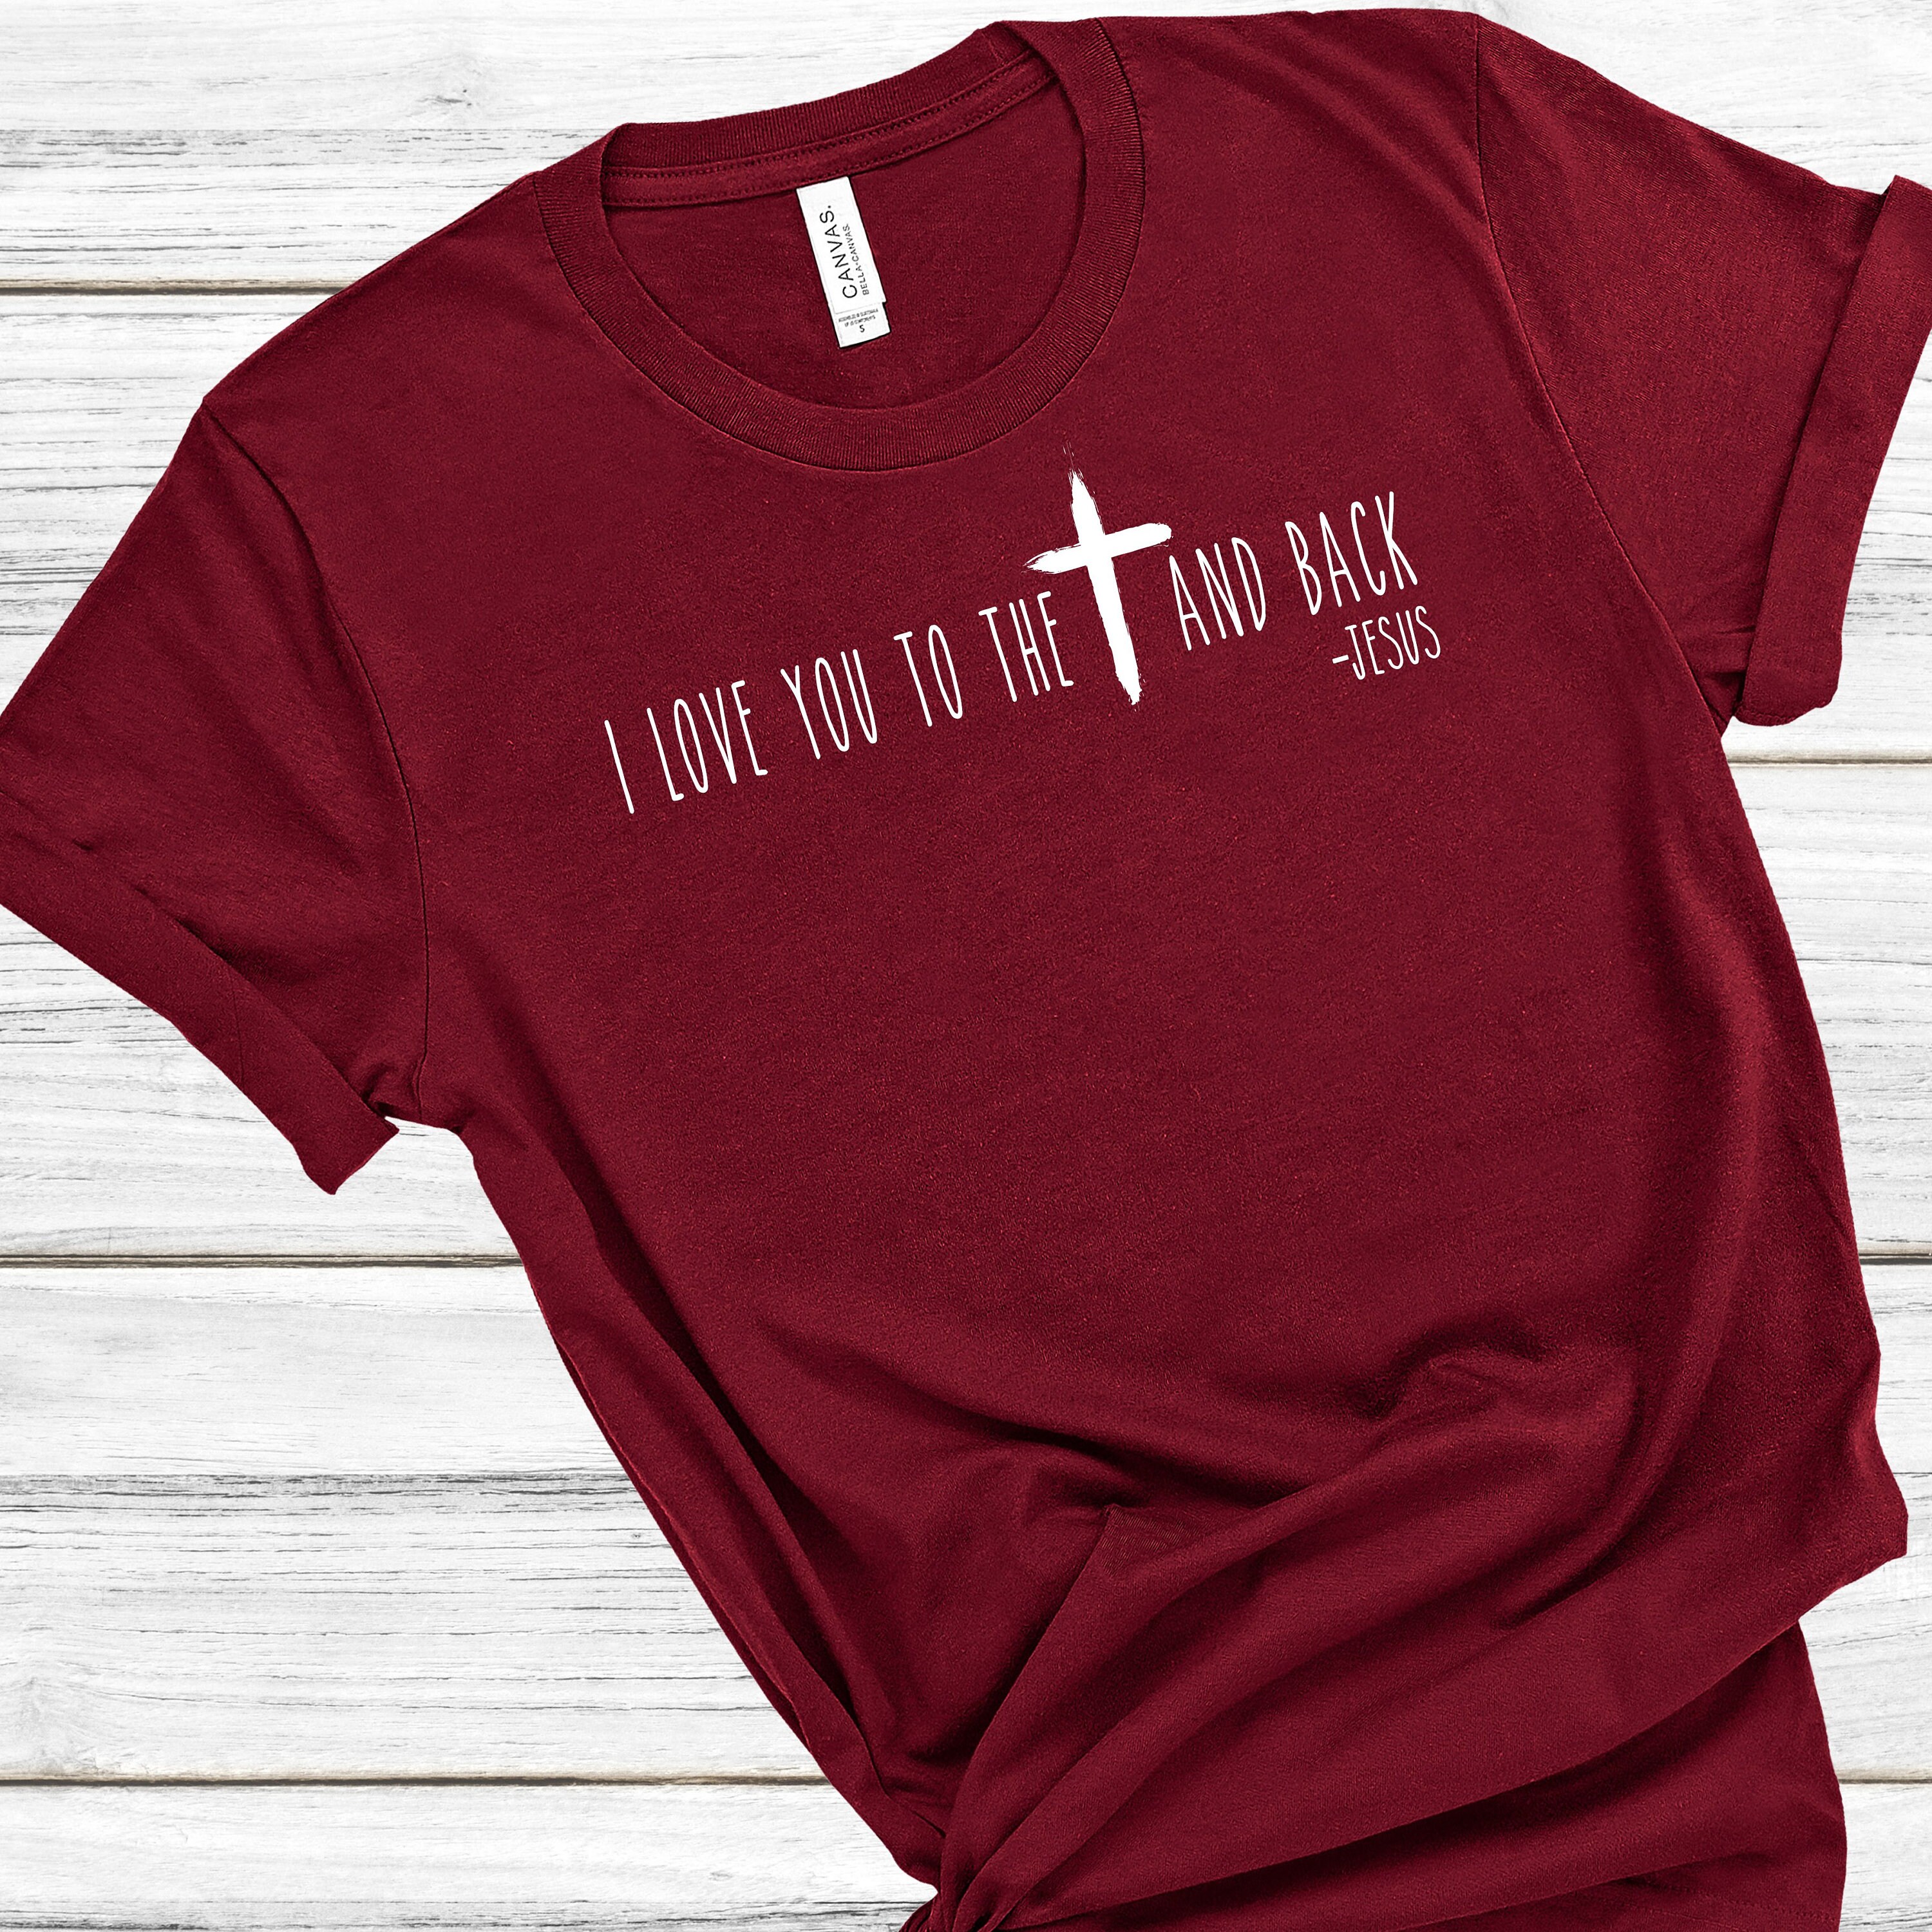 I Love You to the Cross and Back Women's Short Sleeve Tee Christian T ...